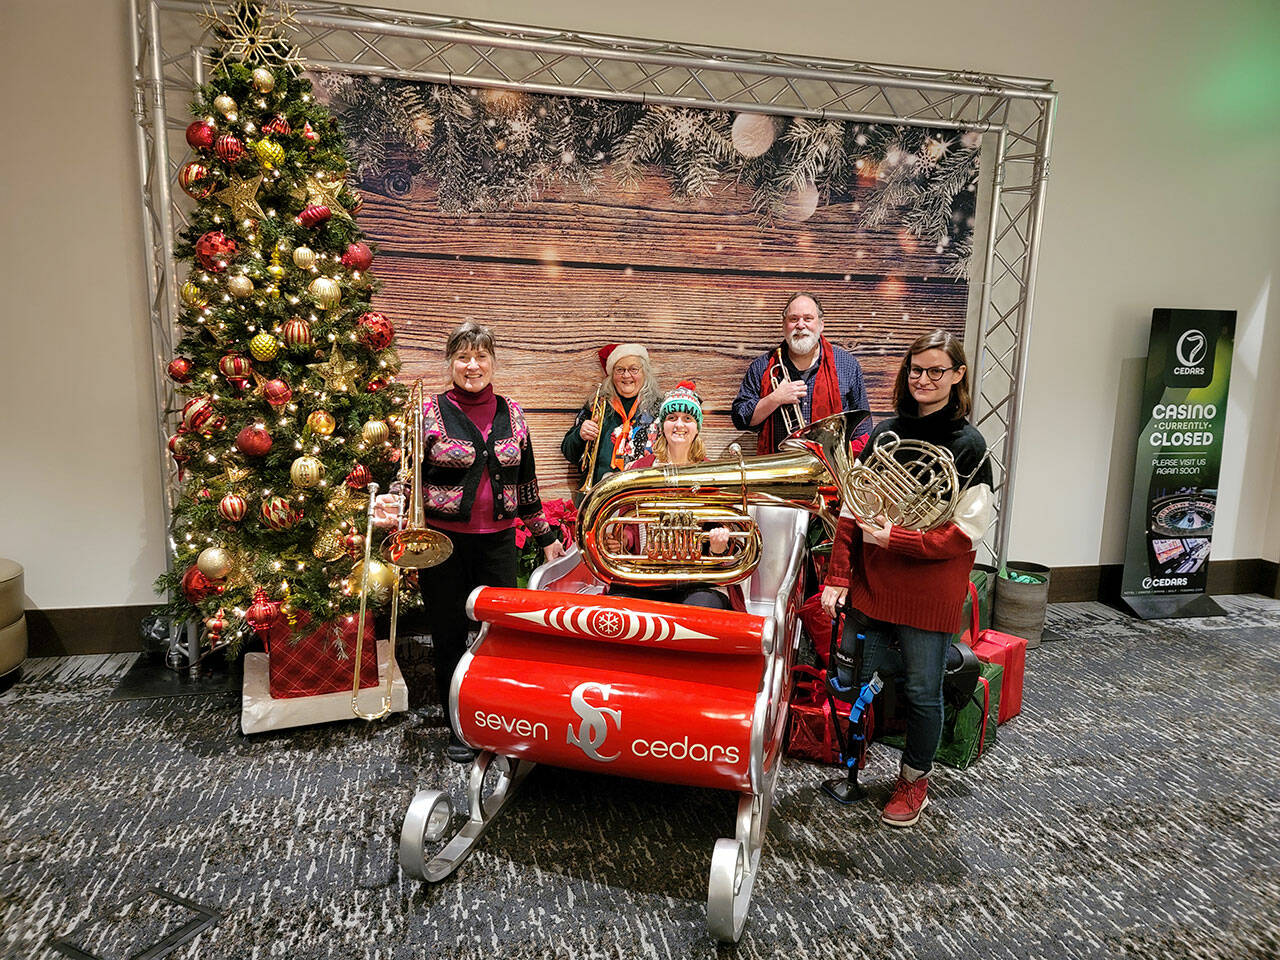 The Sequim City Band Brass Quintet taking a break from playing in Santa's sleigh at 7 Cedars Hotel on Dec. 18. Musicians include: Cindy MacKay, trombone; Cheryl Smoker, trumpet; Hannah Reed, tuba; Jim Bradbury, trumpet, and Kat Creekmore, French horn. Photo by Dave Proebstel